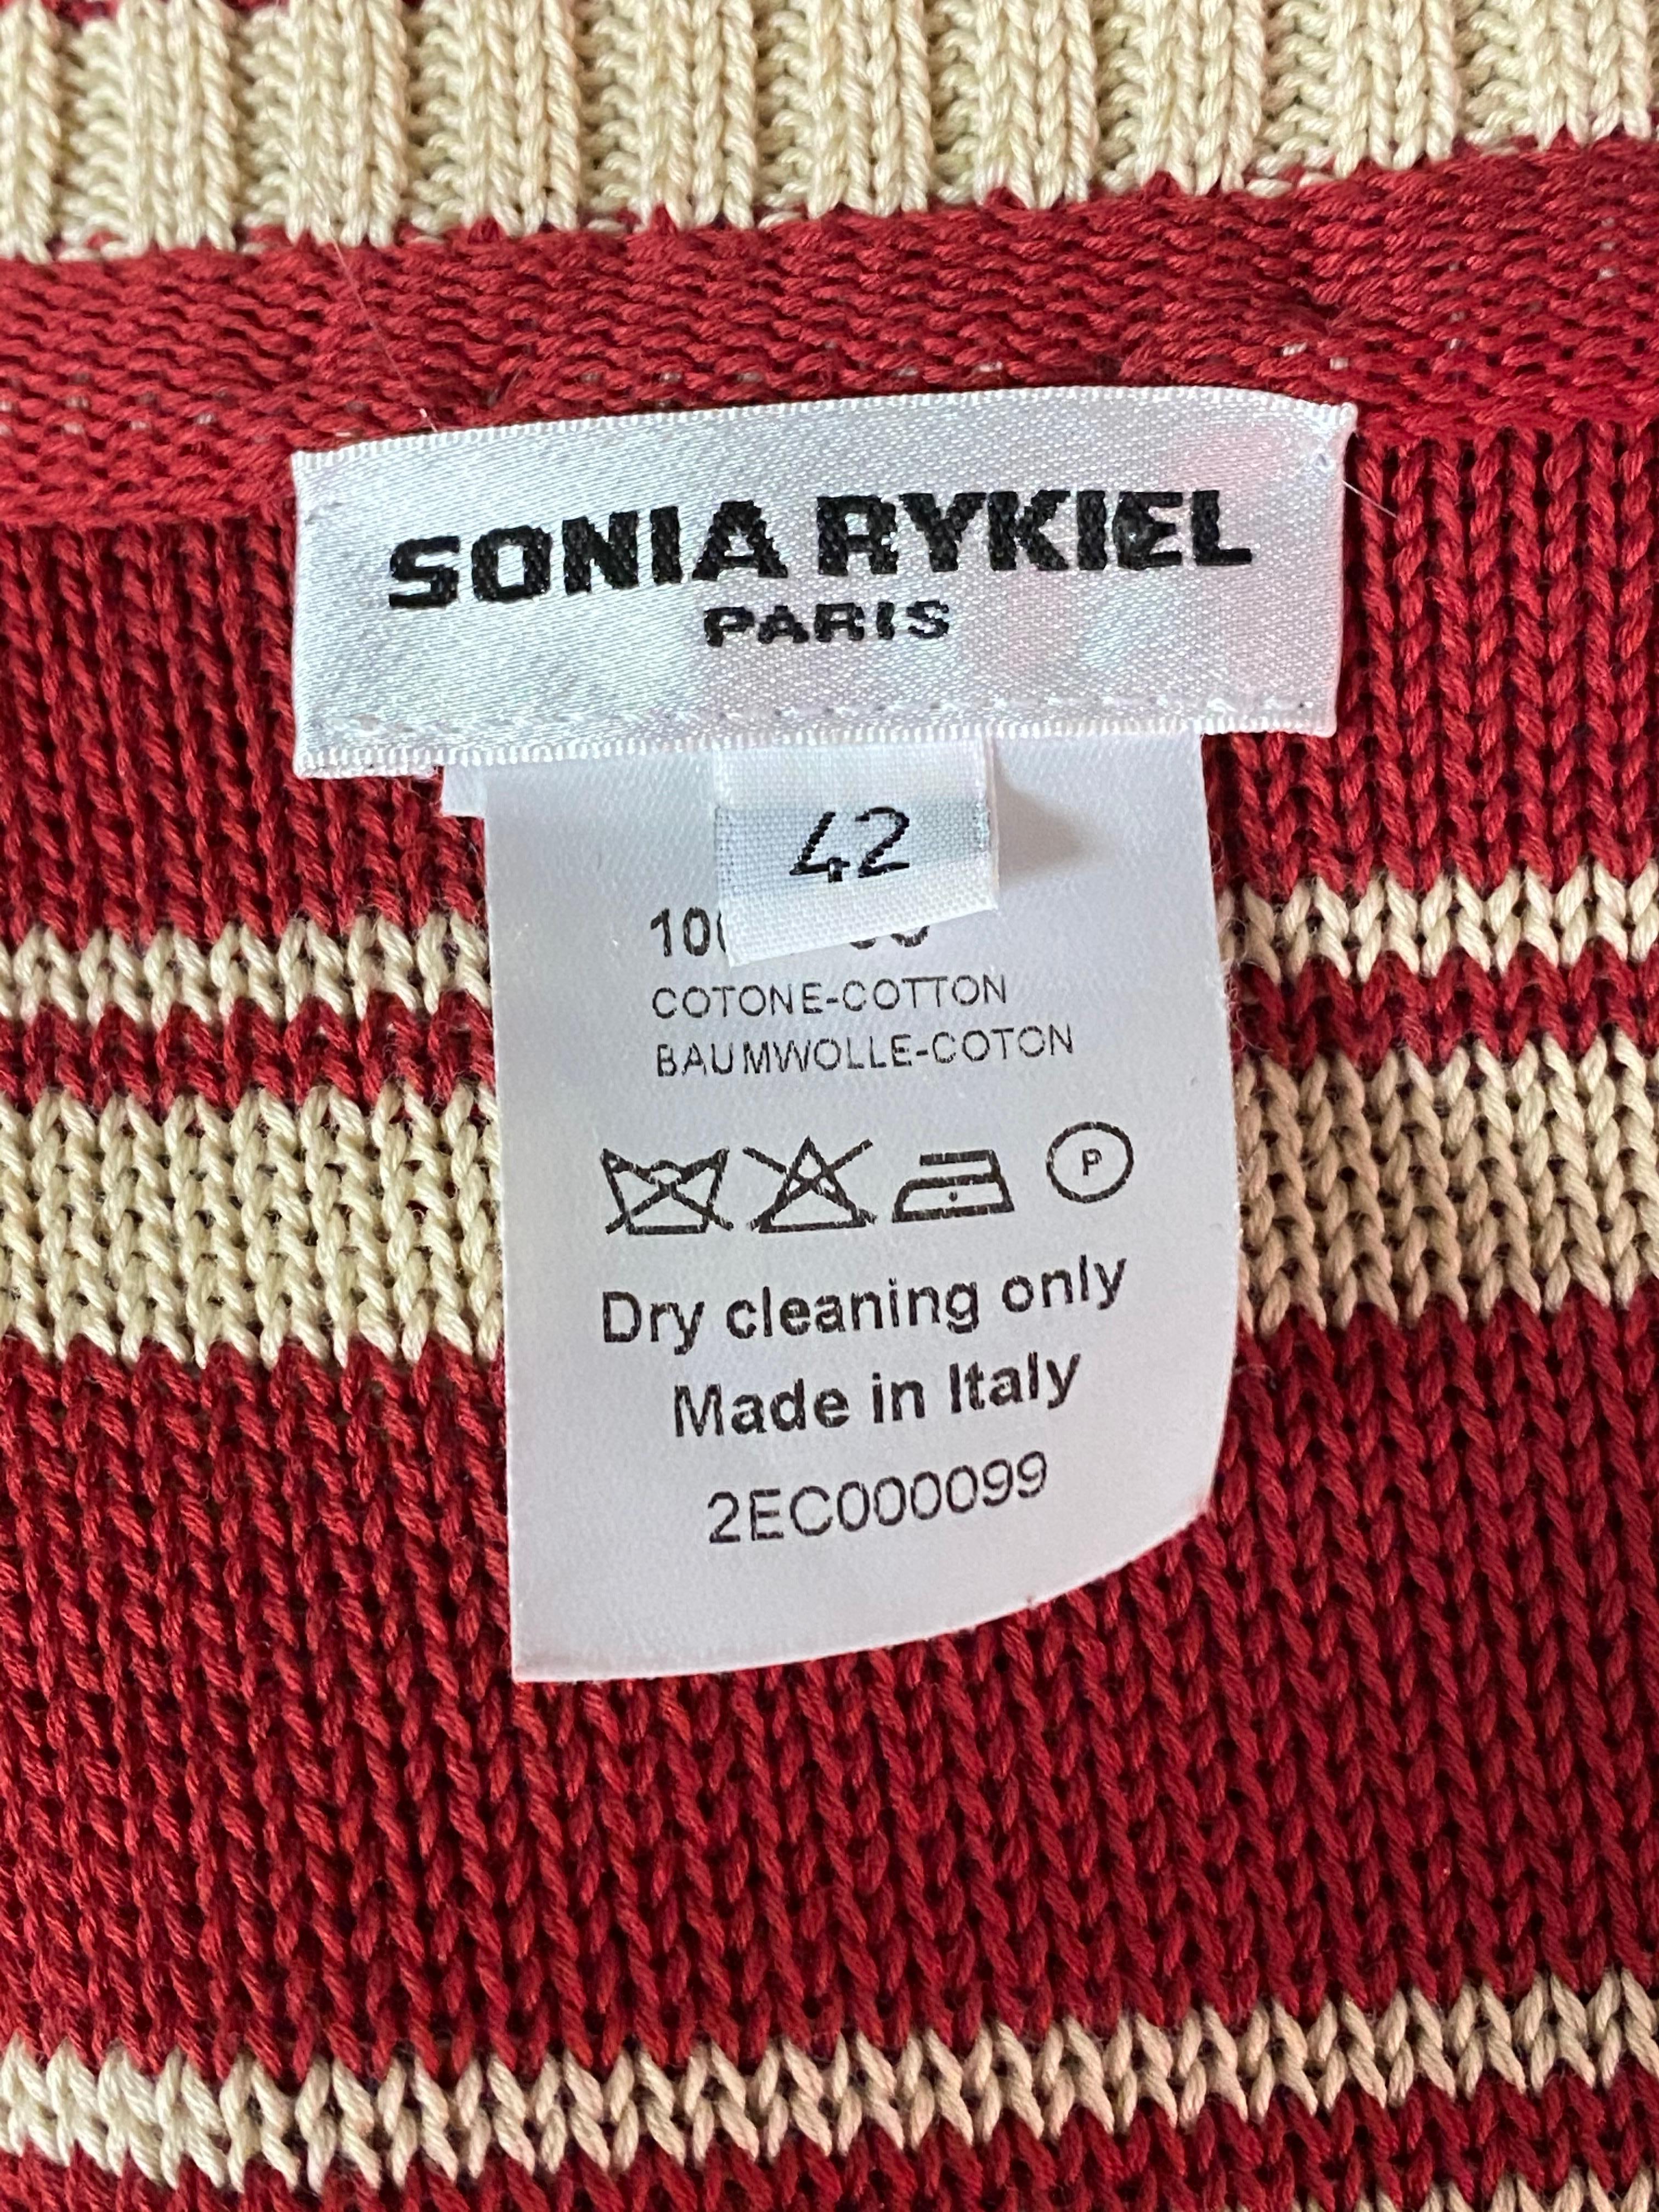 Sonia Rykiel Paris Red and White Knit Cotton Cardigan Sweater, Size 42 For Sale 1